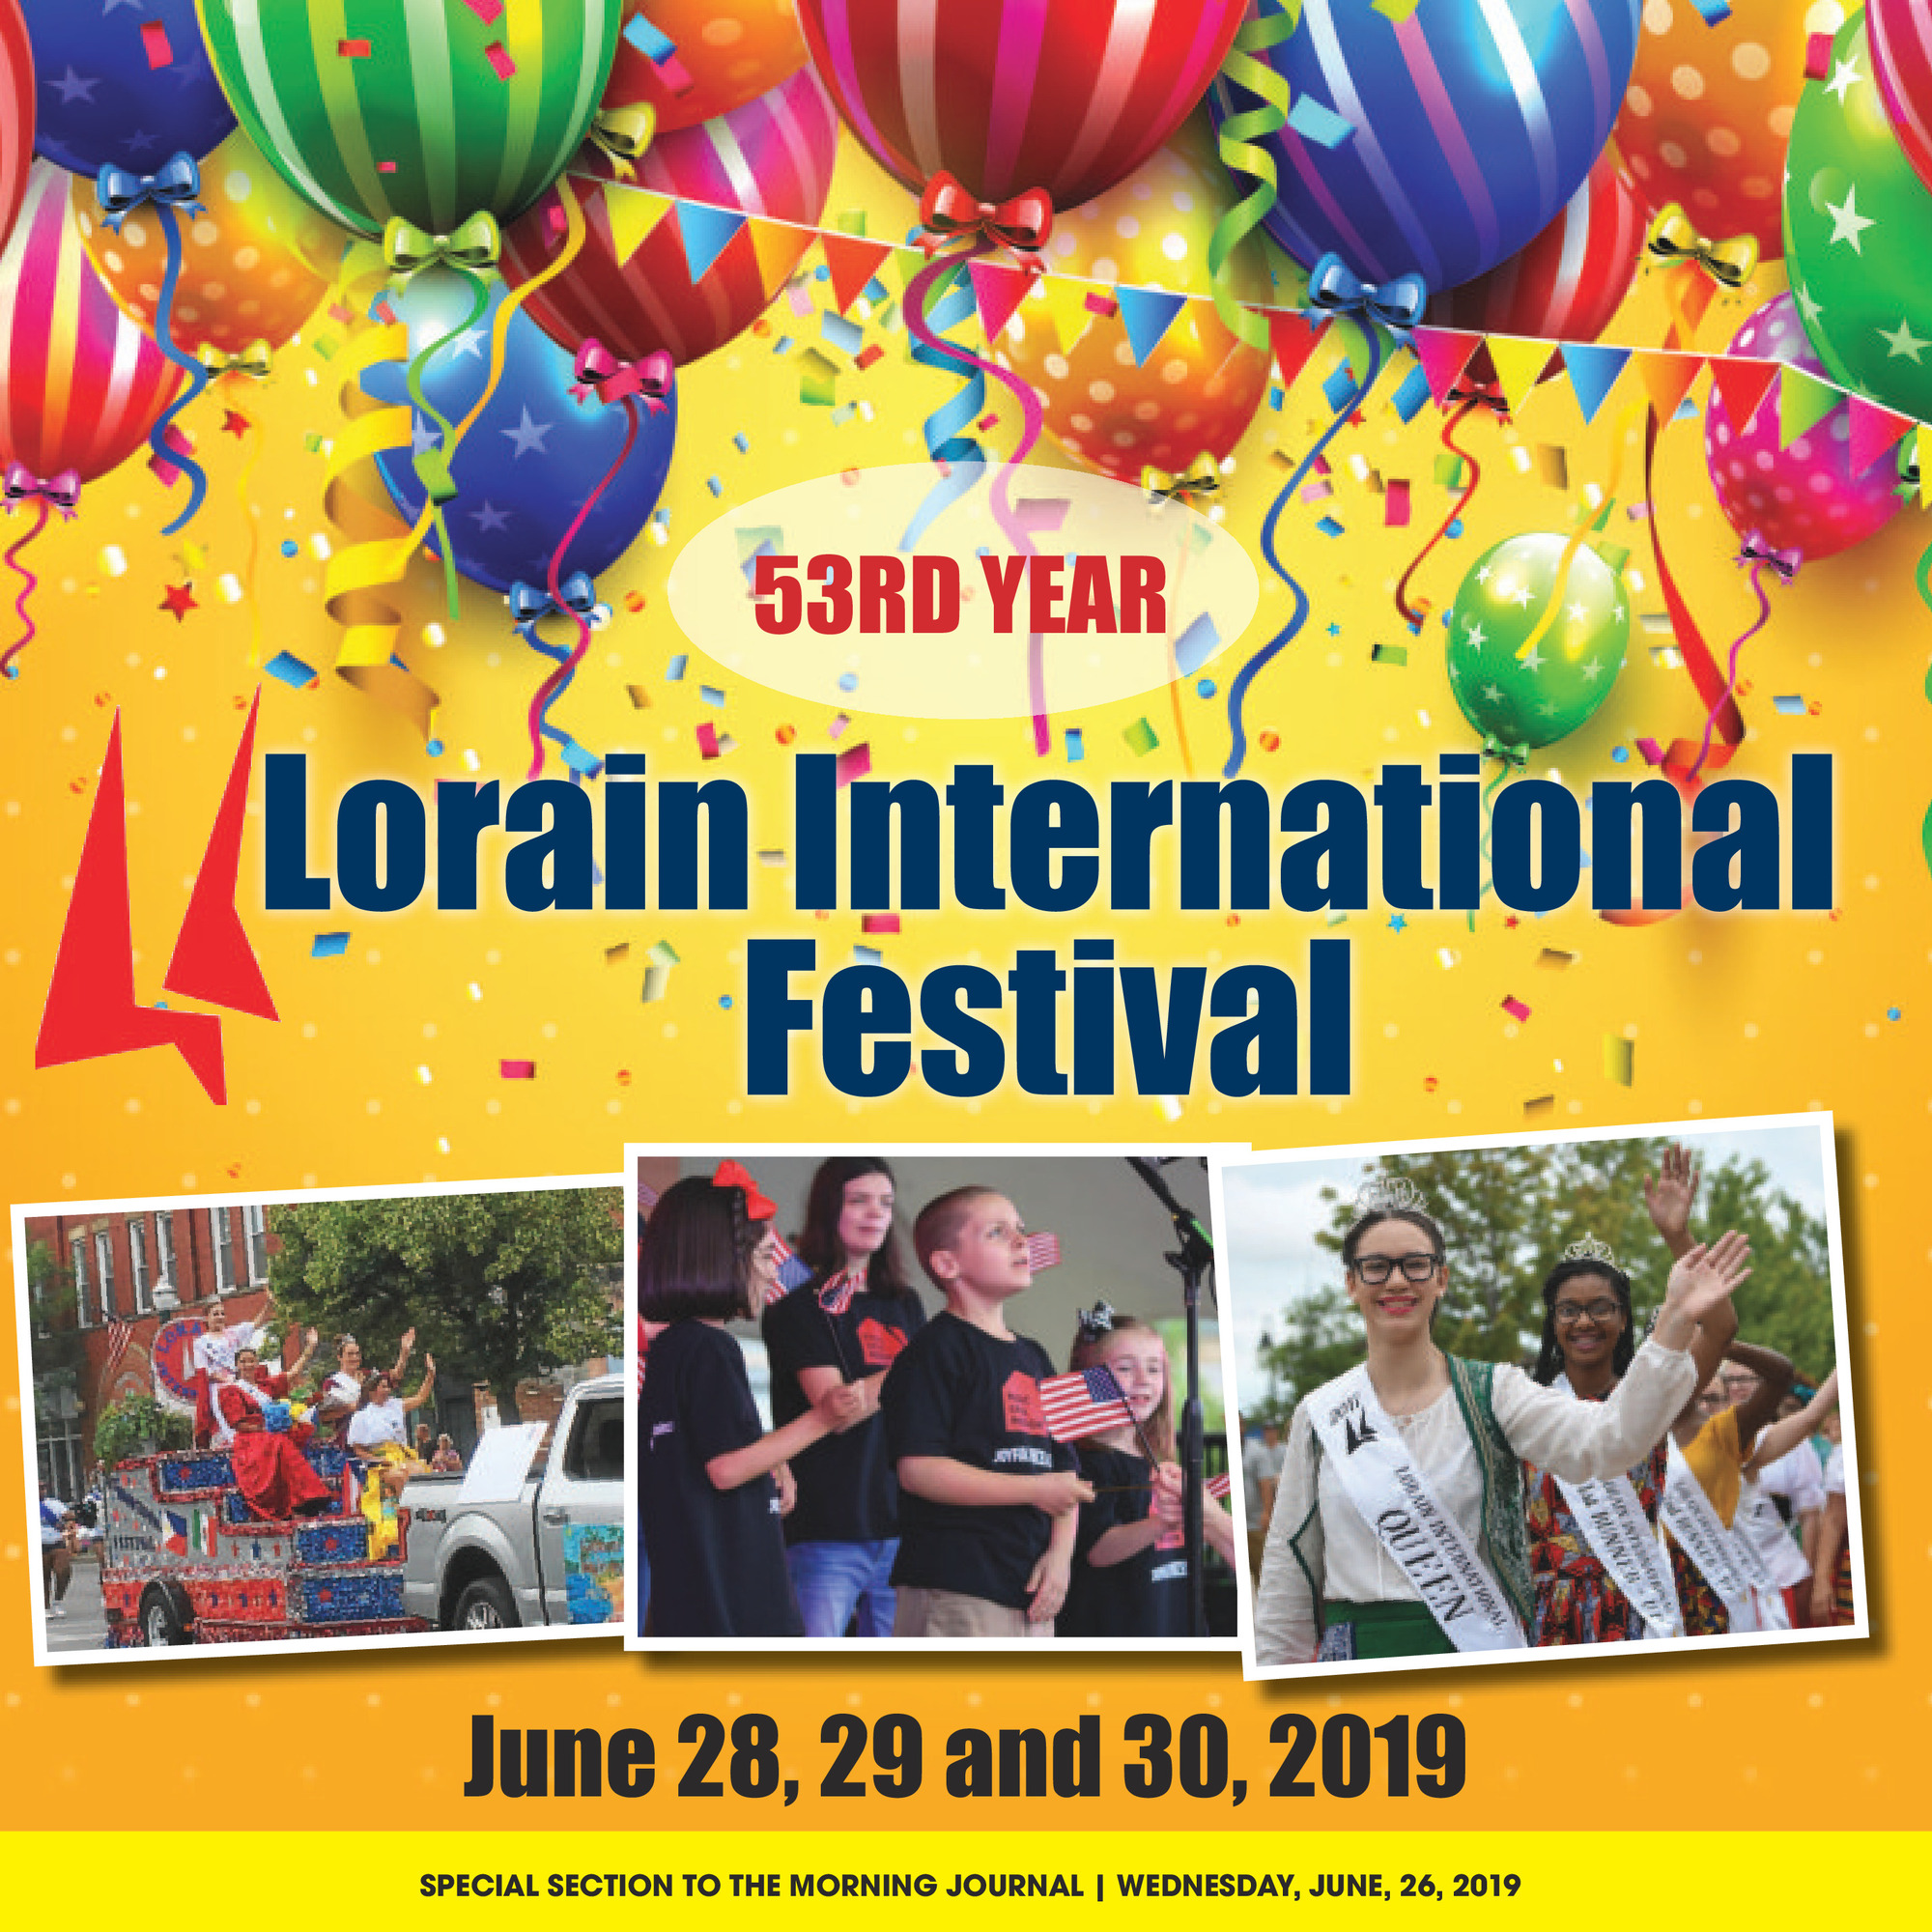 Morning Journal Special Sections Lorain International Festival 2019